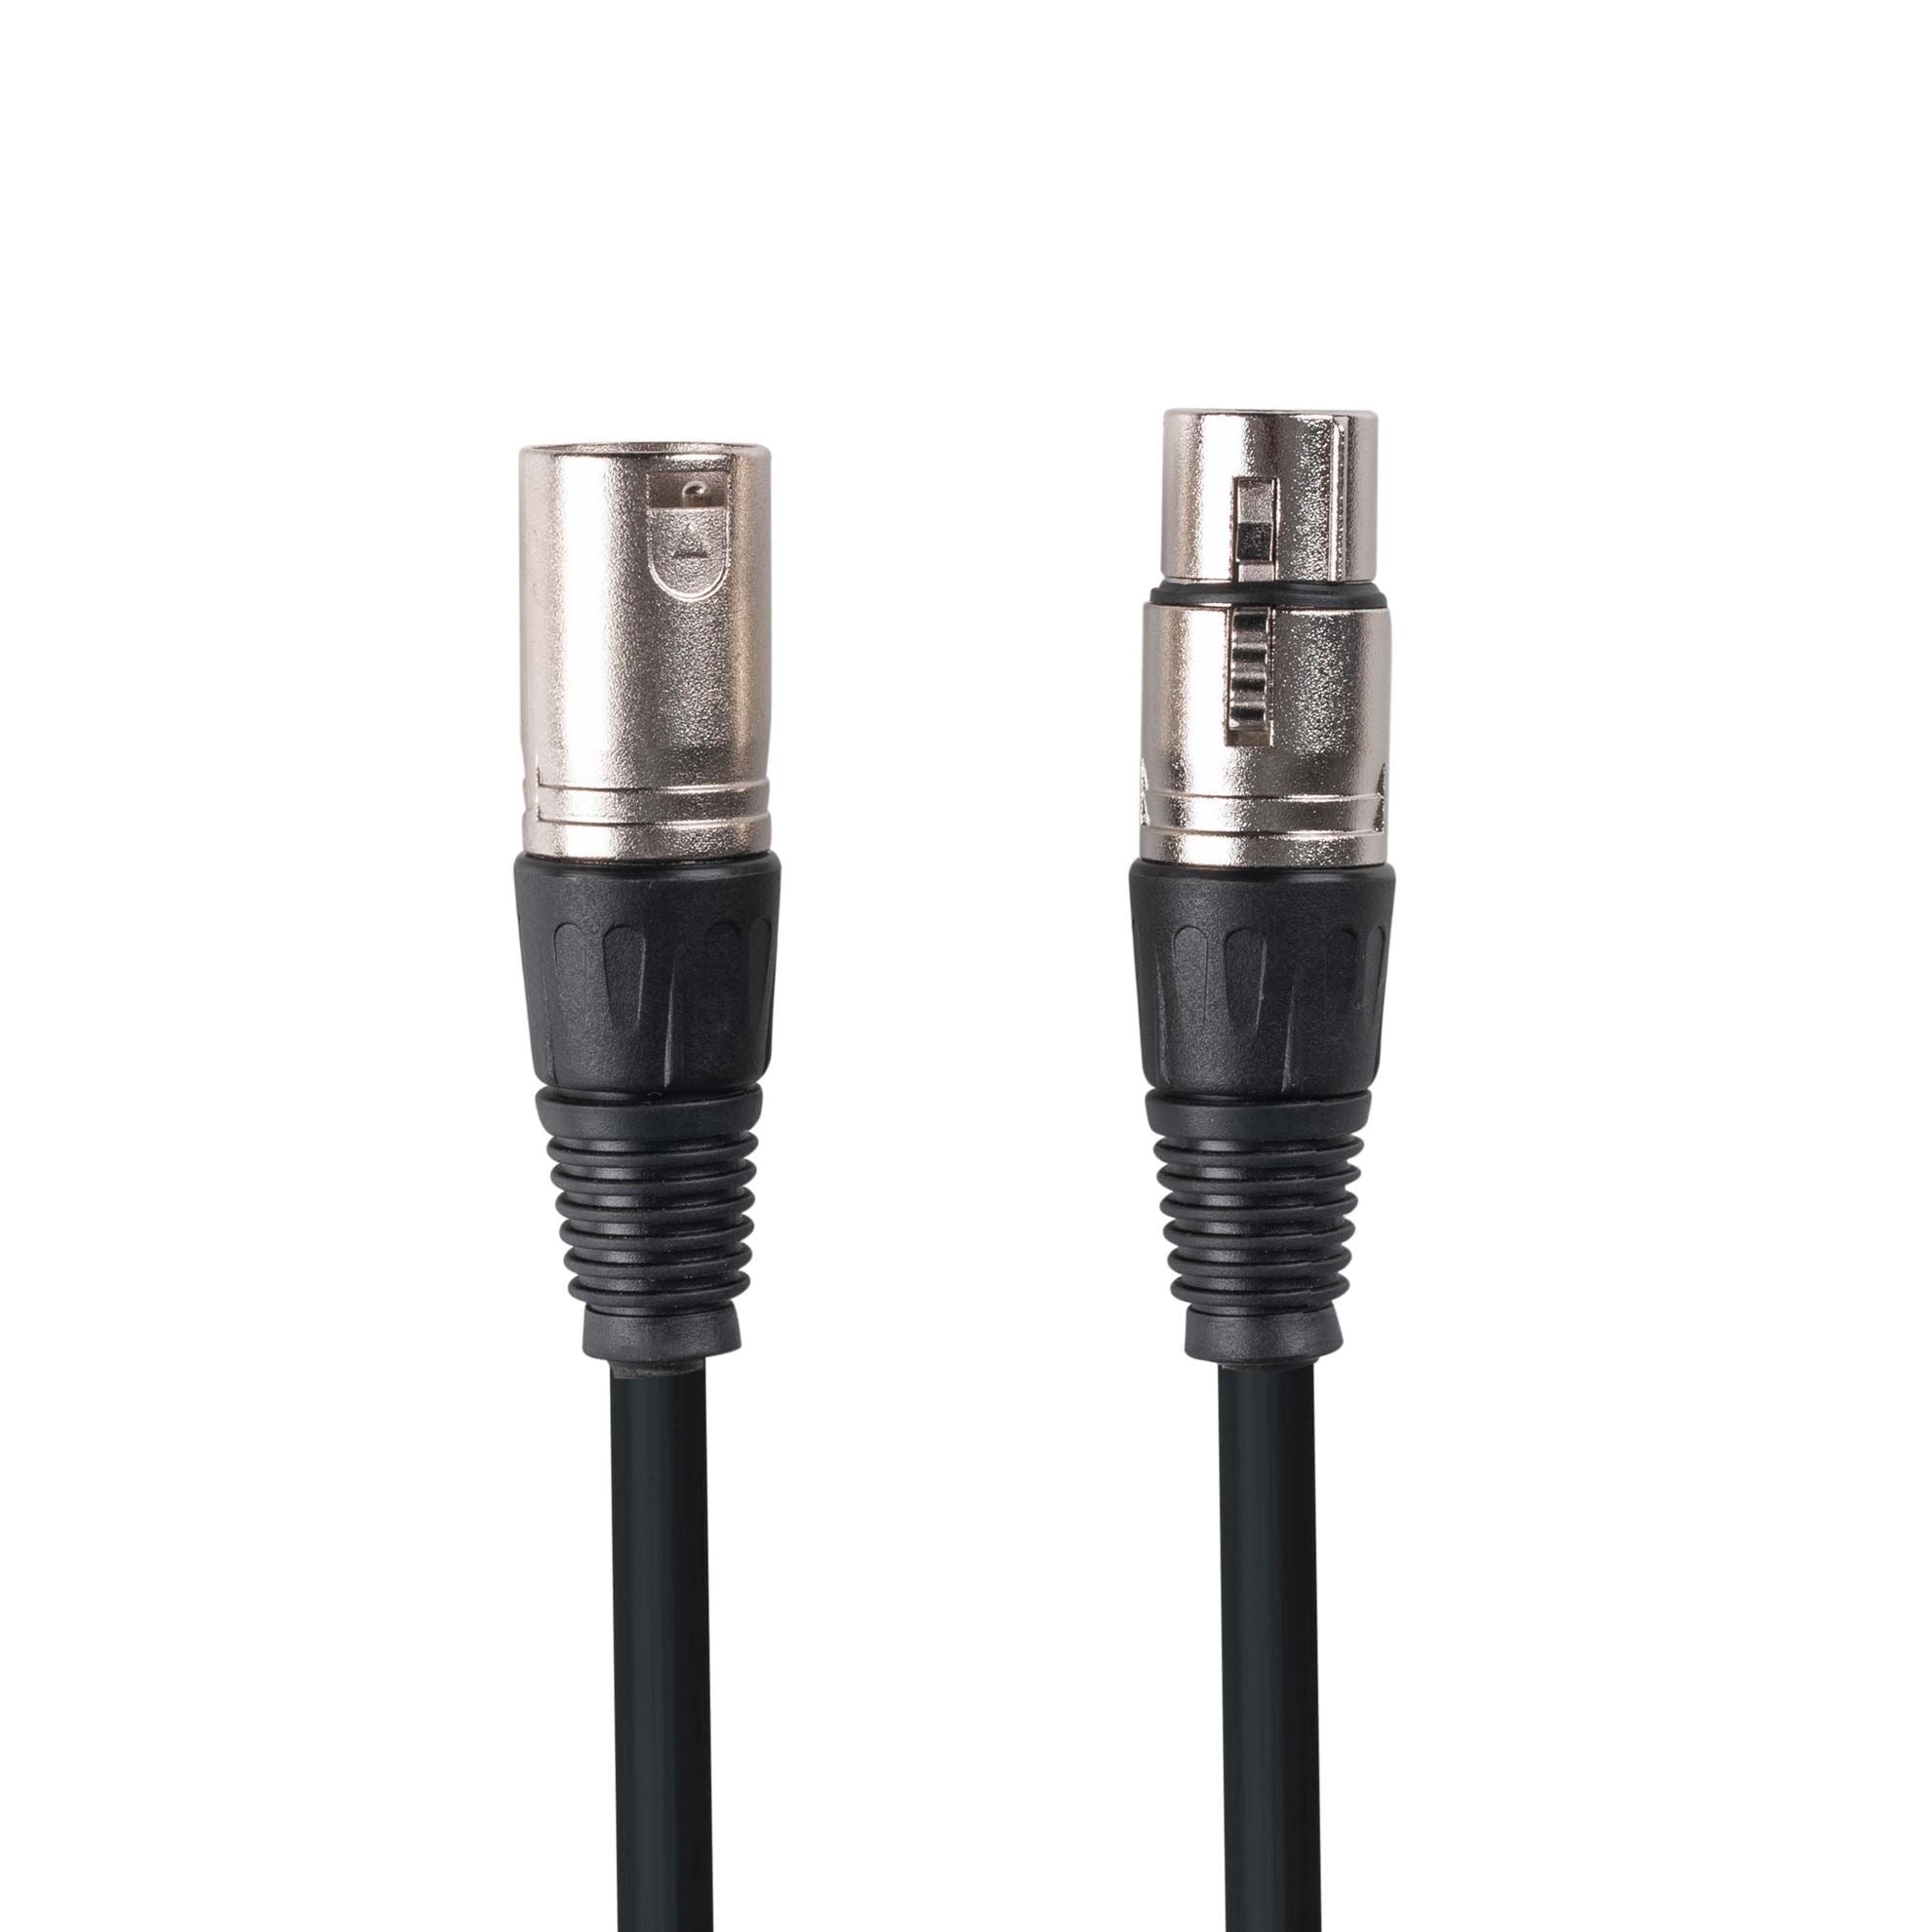 DYNAMIX_10m_XLR_3-Pin_Male_to_Female_Balanced_Audio_Cable 1246